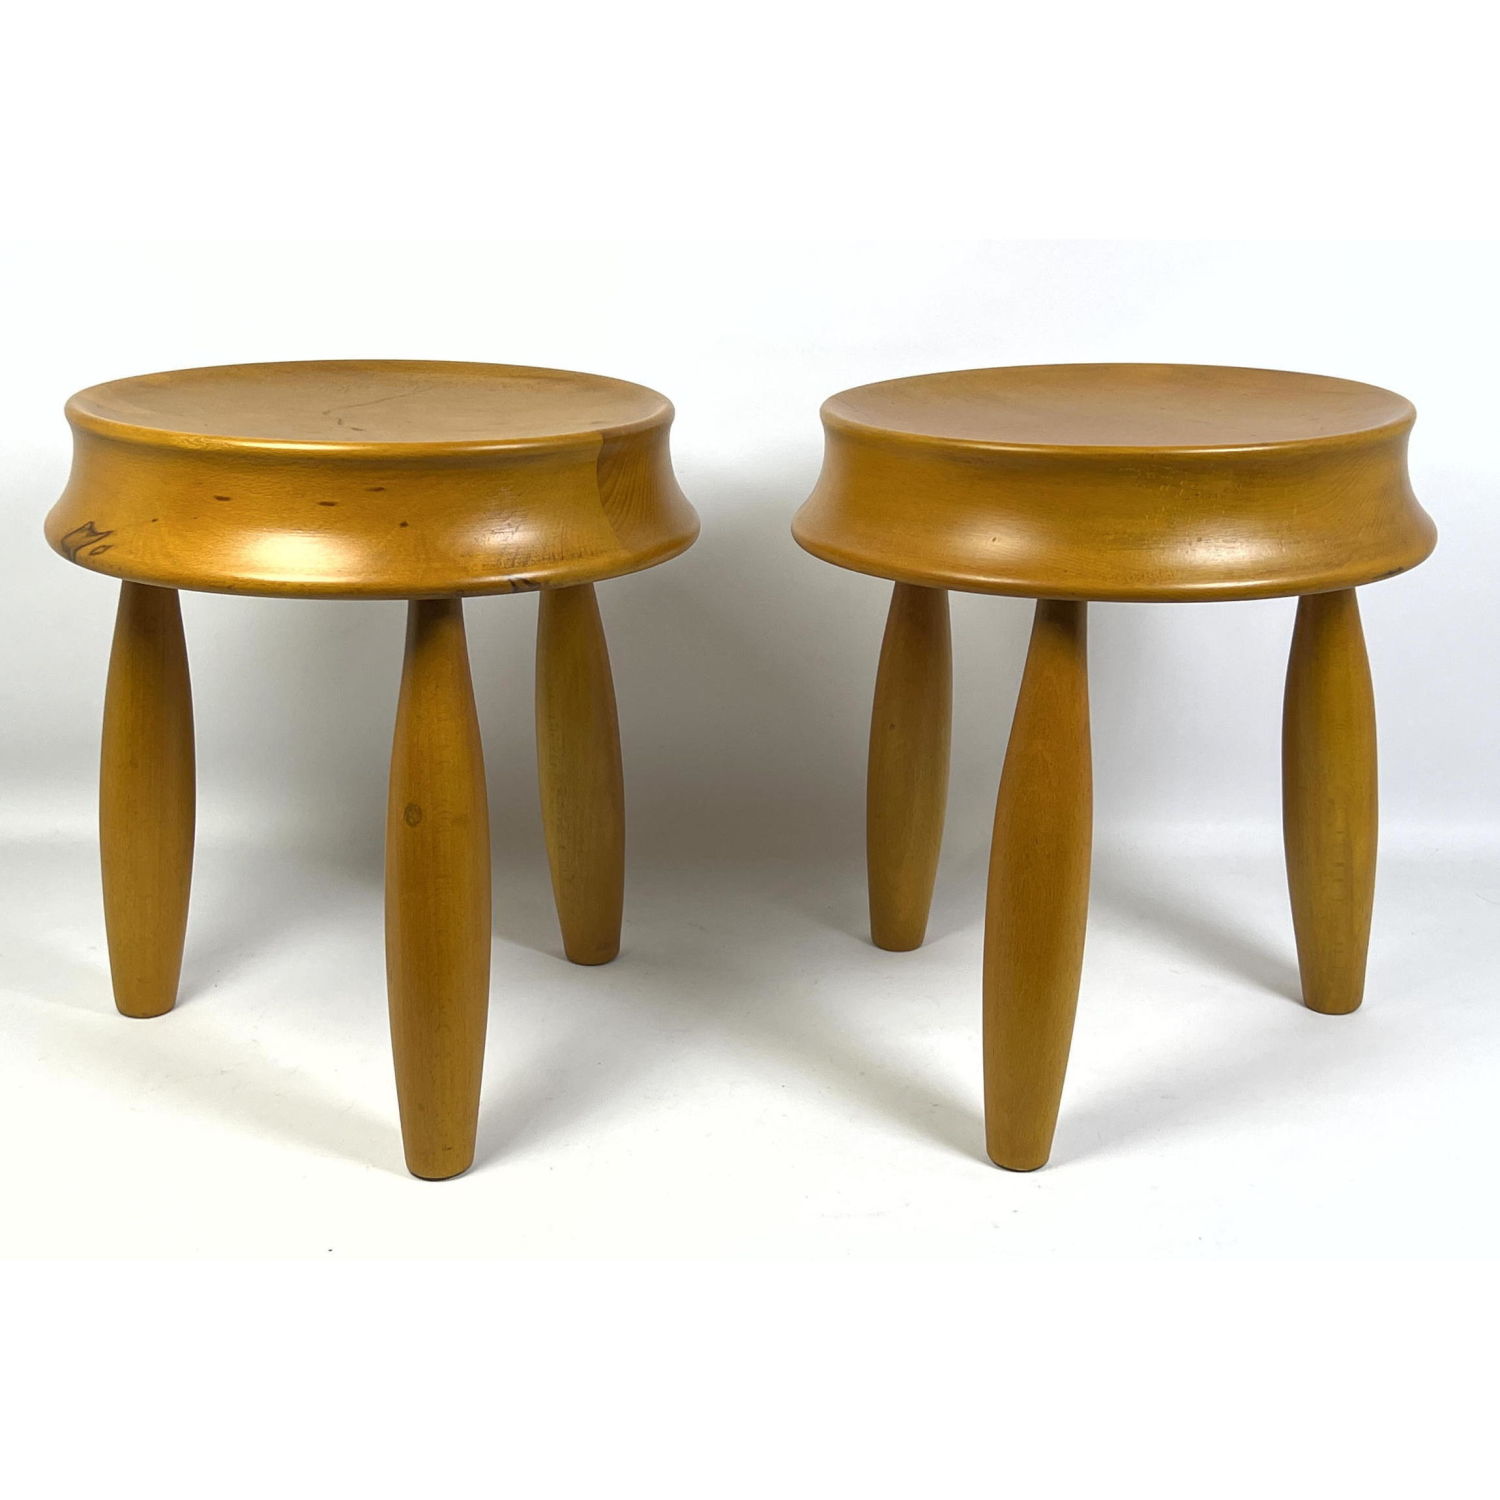 A pair of wood stools in the manner